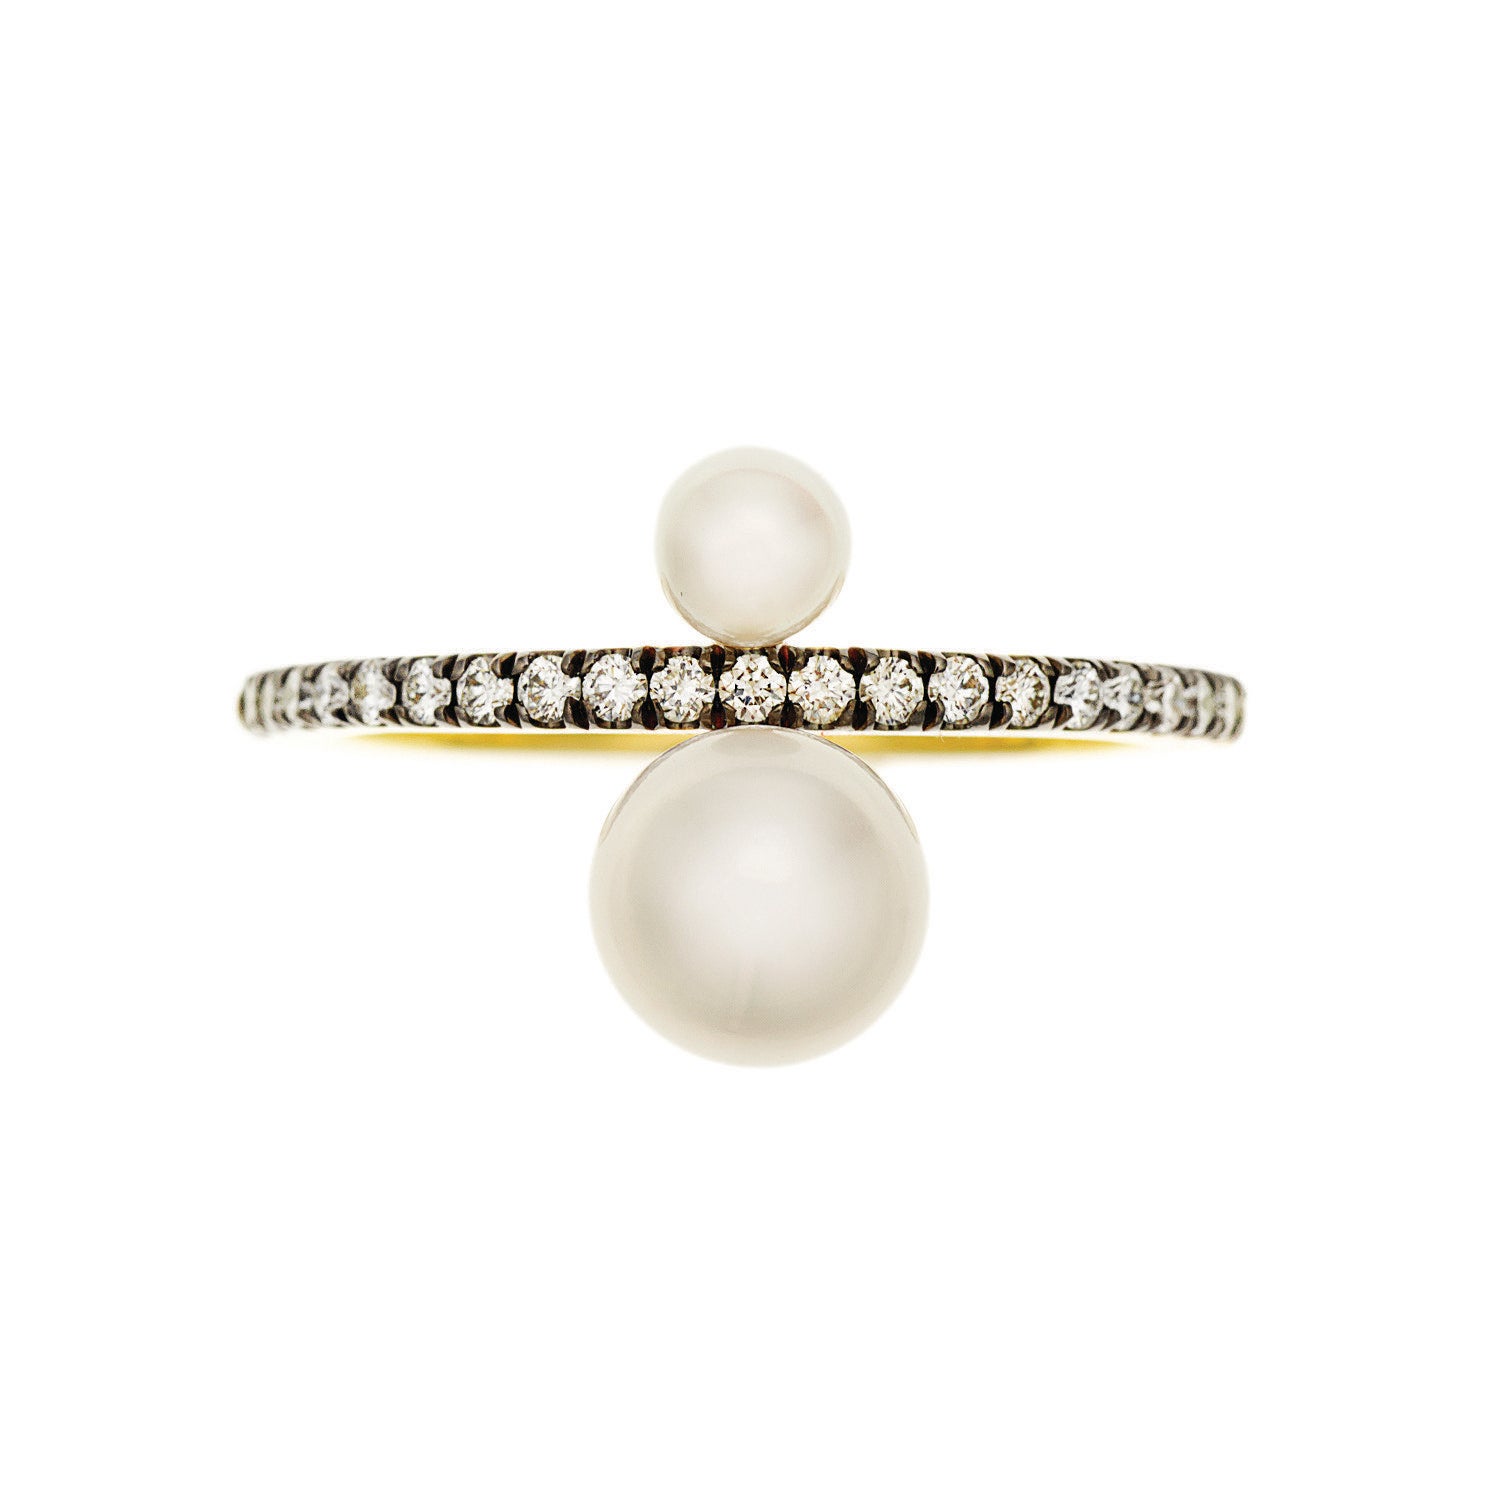 Jemma Wynne Prive White Pearl and Pave Diamond Ring